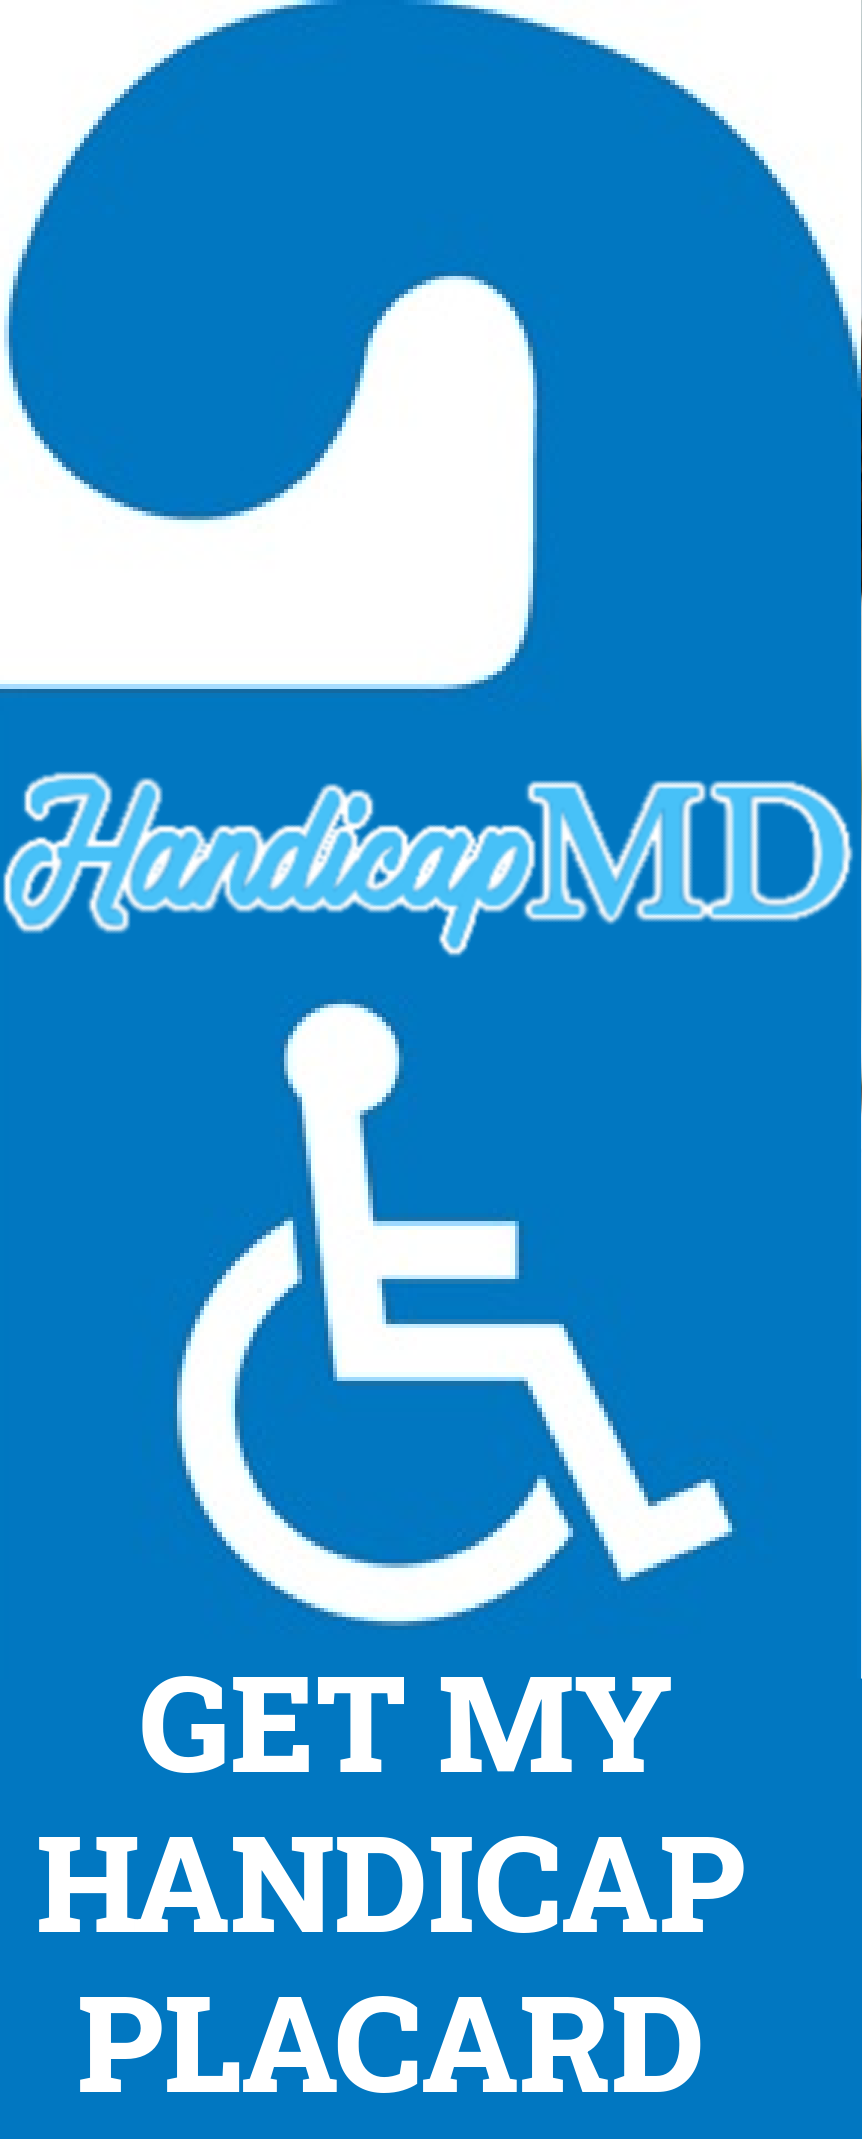 How To Get A Handicap Parking Placard Renewal in Delaware